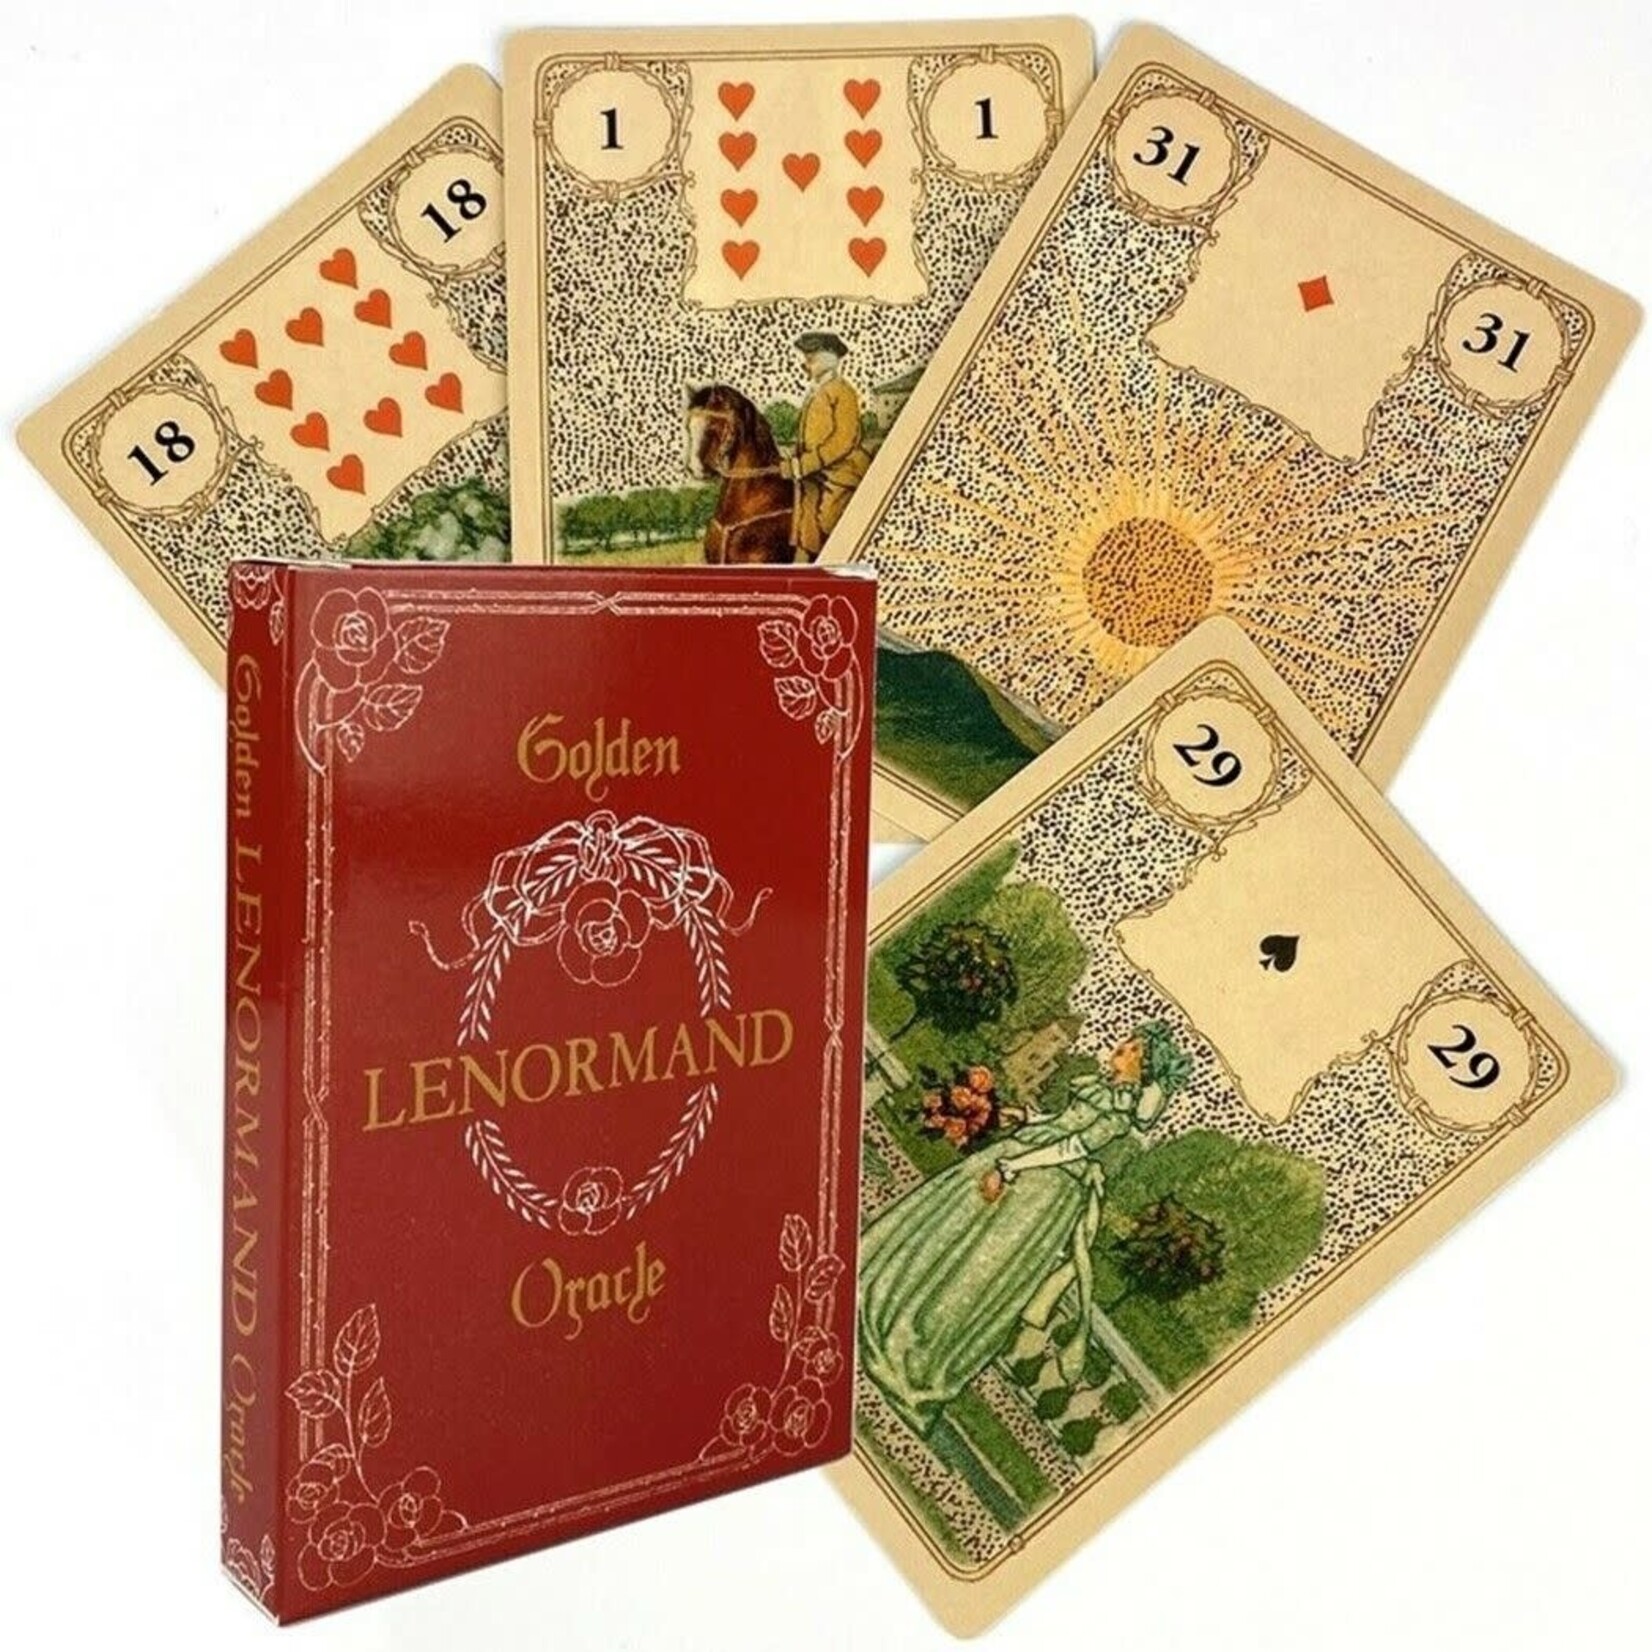 Lenormand Tarot Oracle Cards, Lenormand Oracle Cards Deck